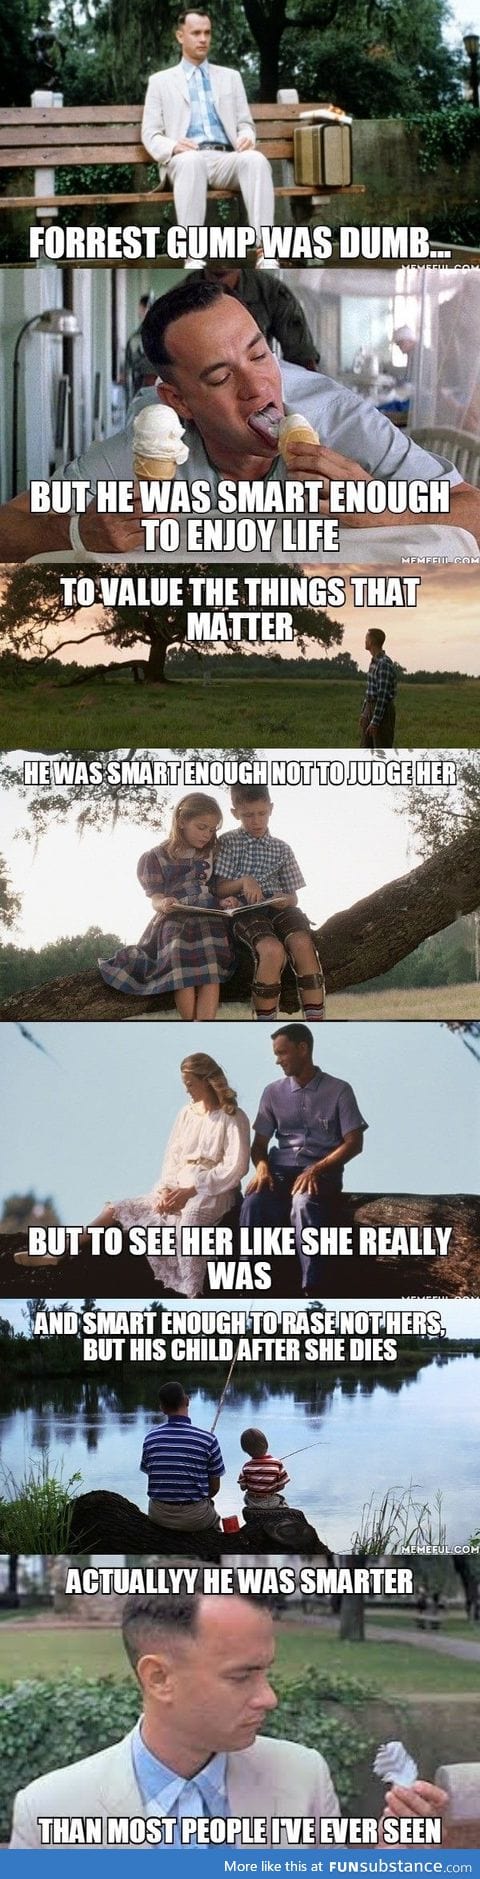 Forrest Gump wasn't just the story of a stupid guy